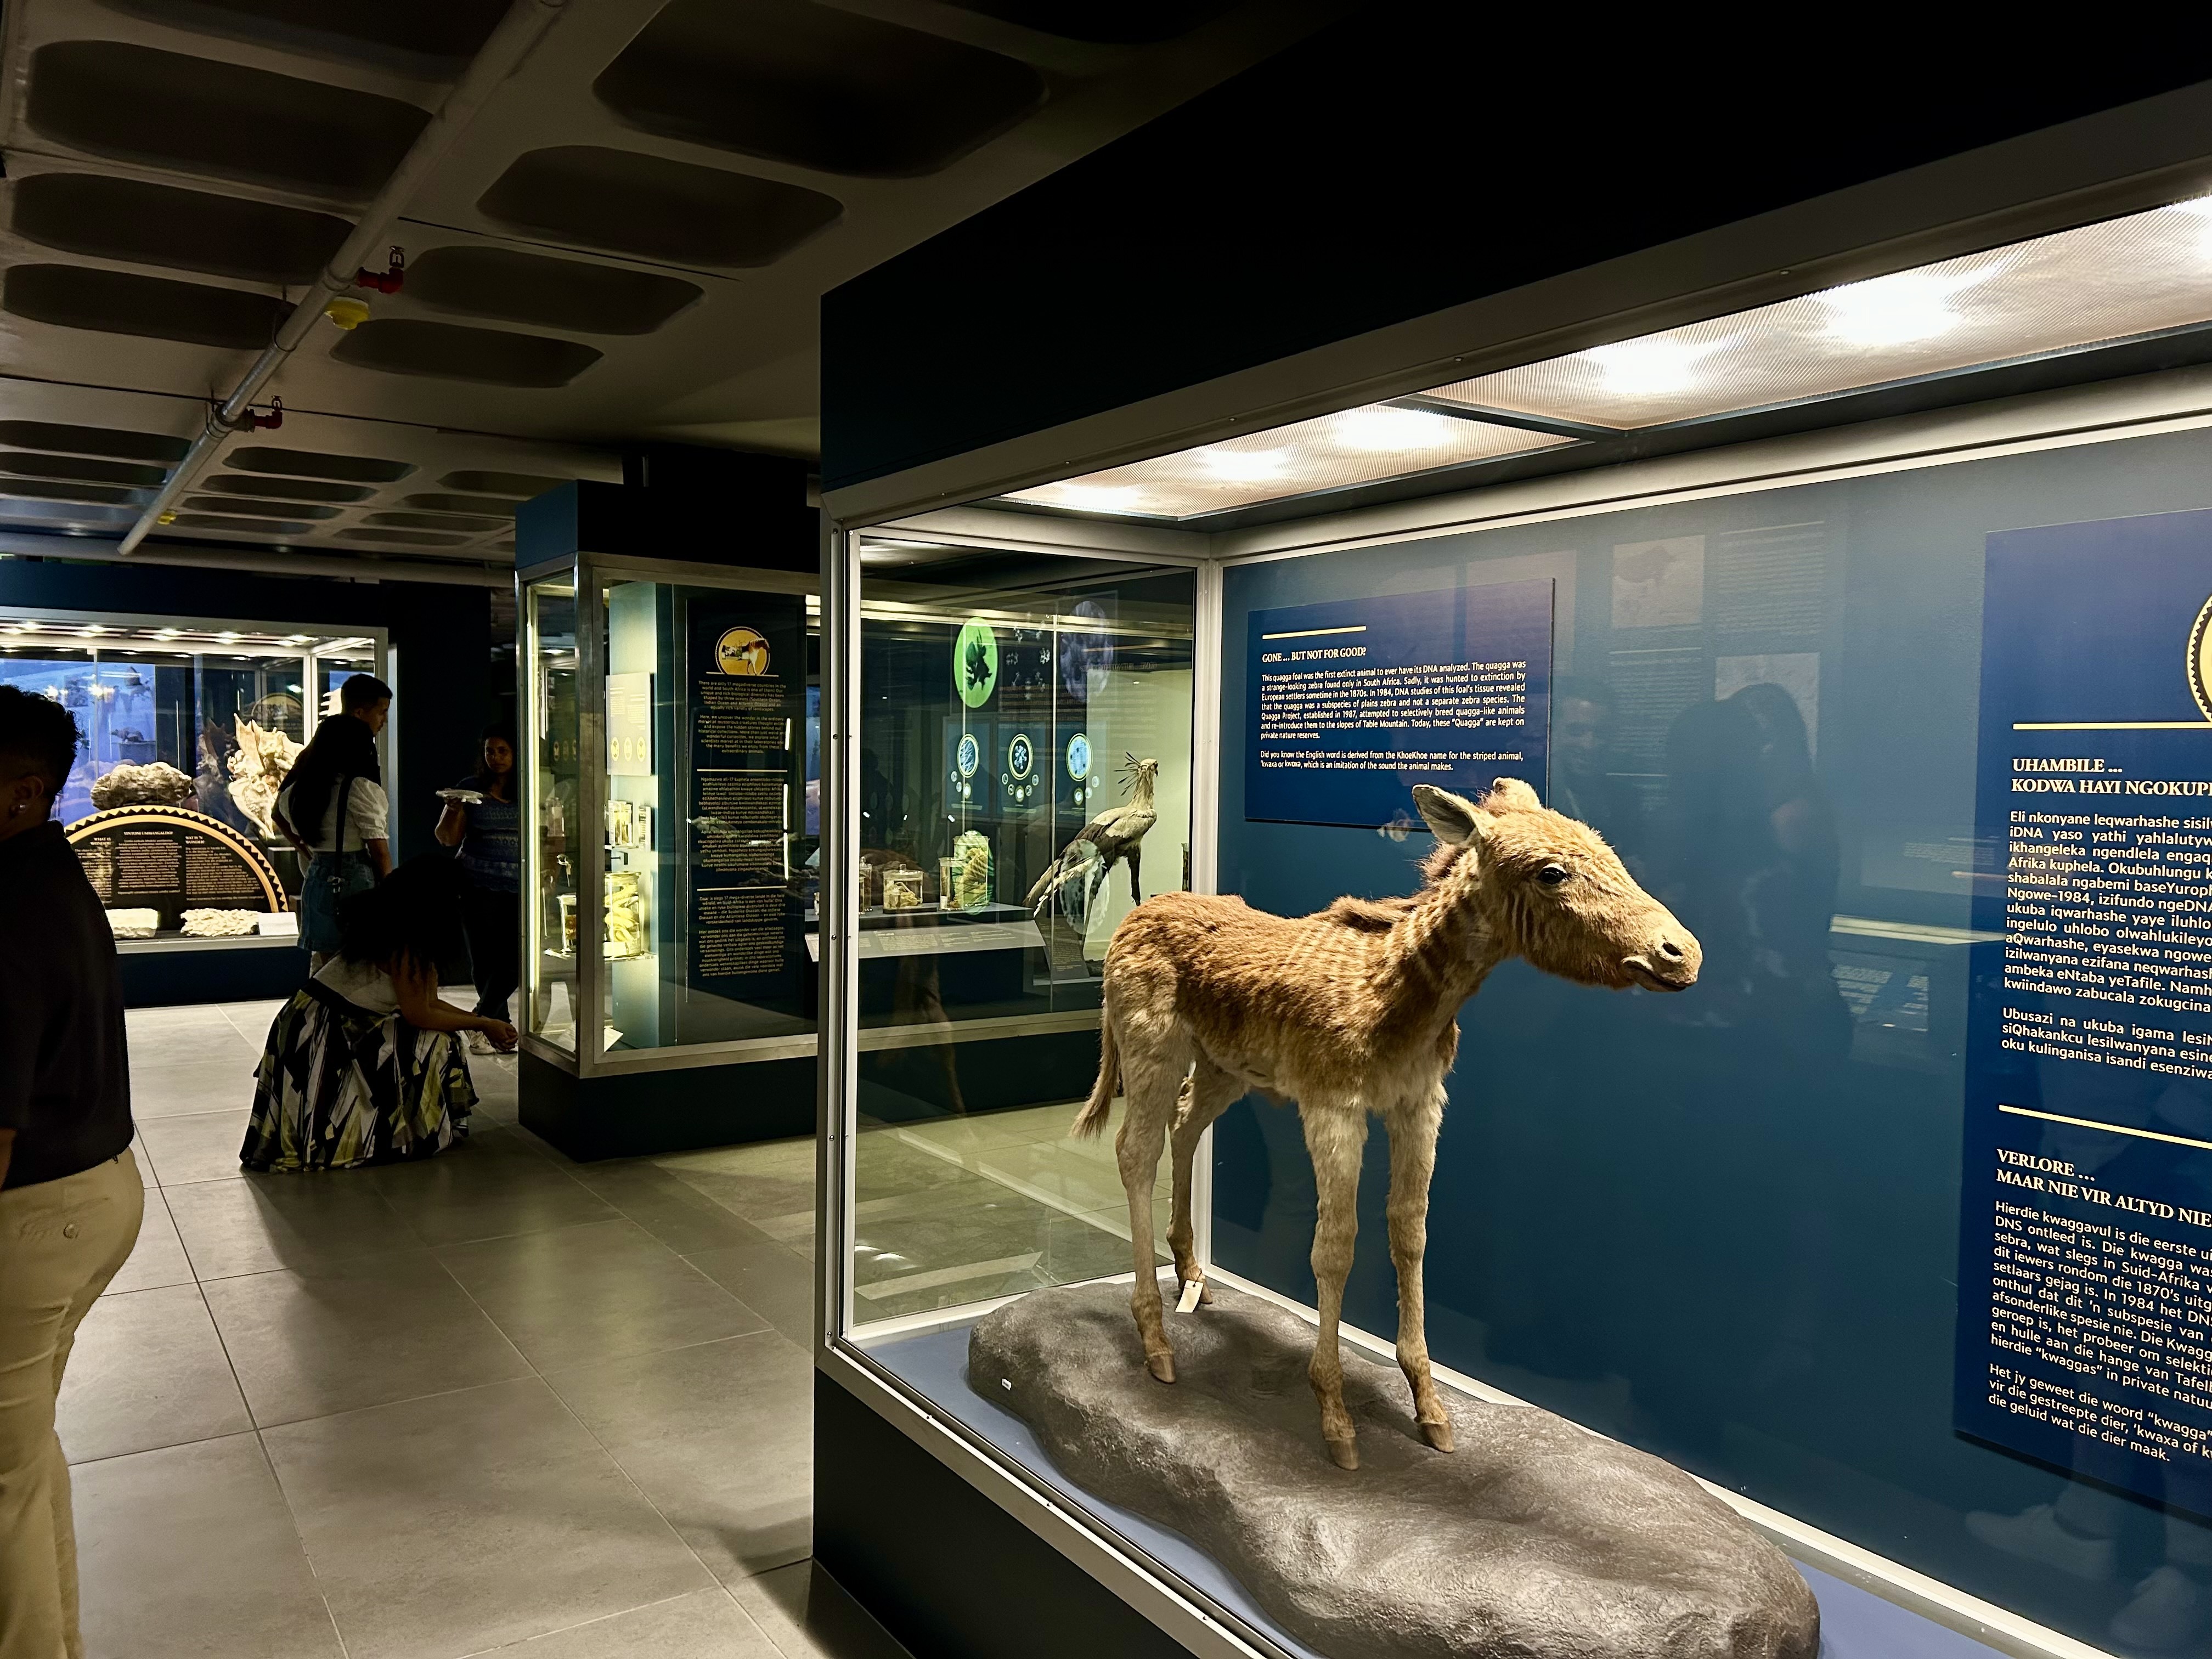 The quagga foal on display at the “The Hidden Wonders of the Iziko South African Museum” exhibition was the first extinct animal to ever have its DNA analysed. Image: Jean-Marie Uys